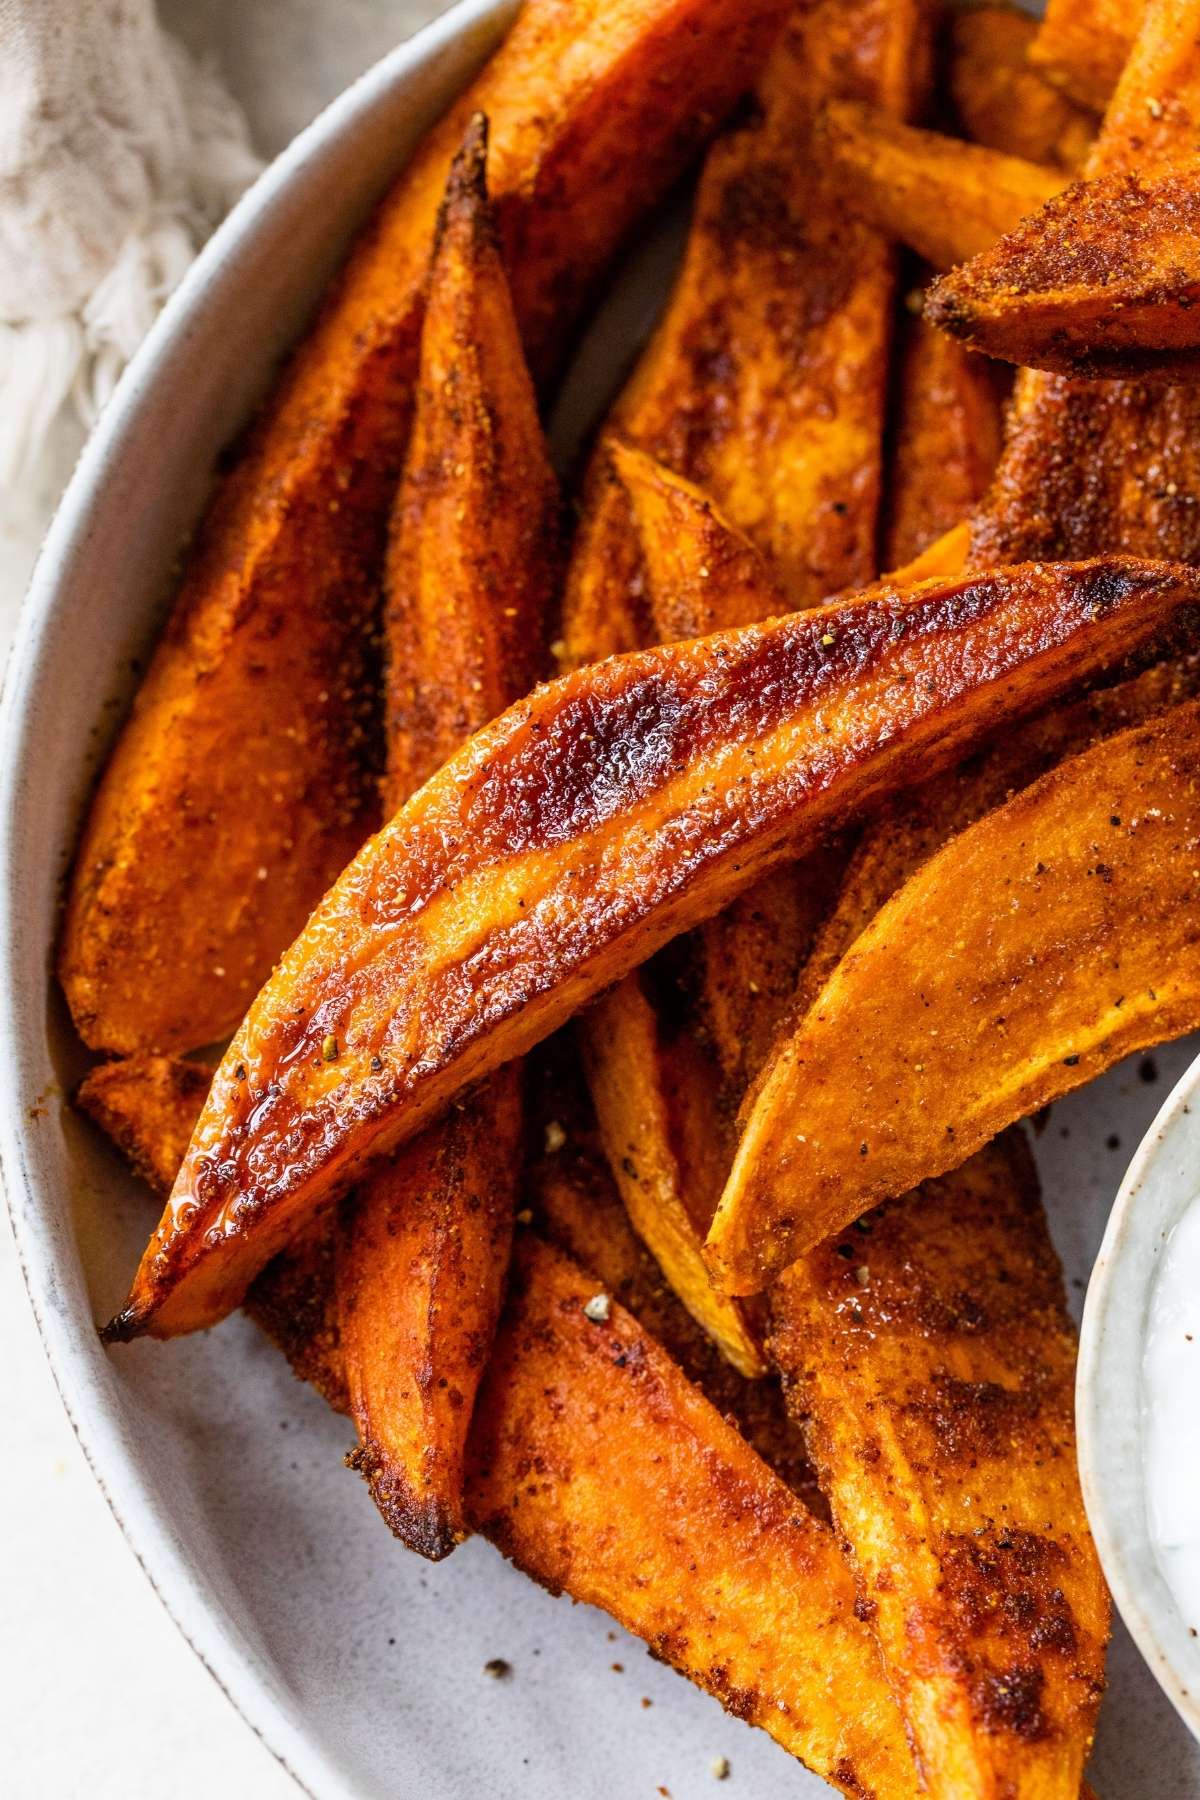 Closeup view of sweet potato wedges on a plate.